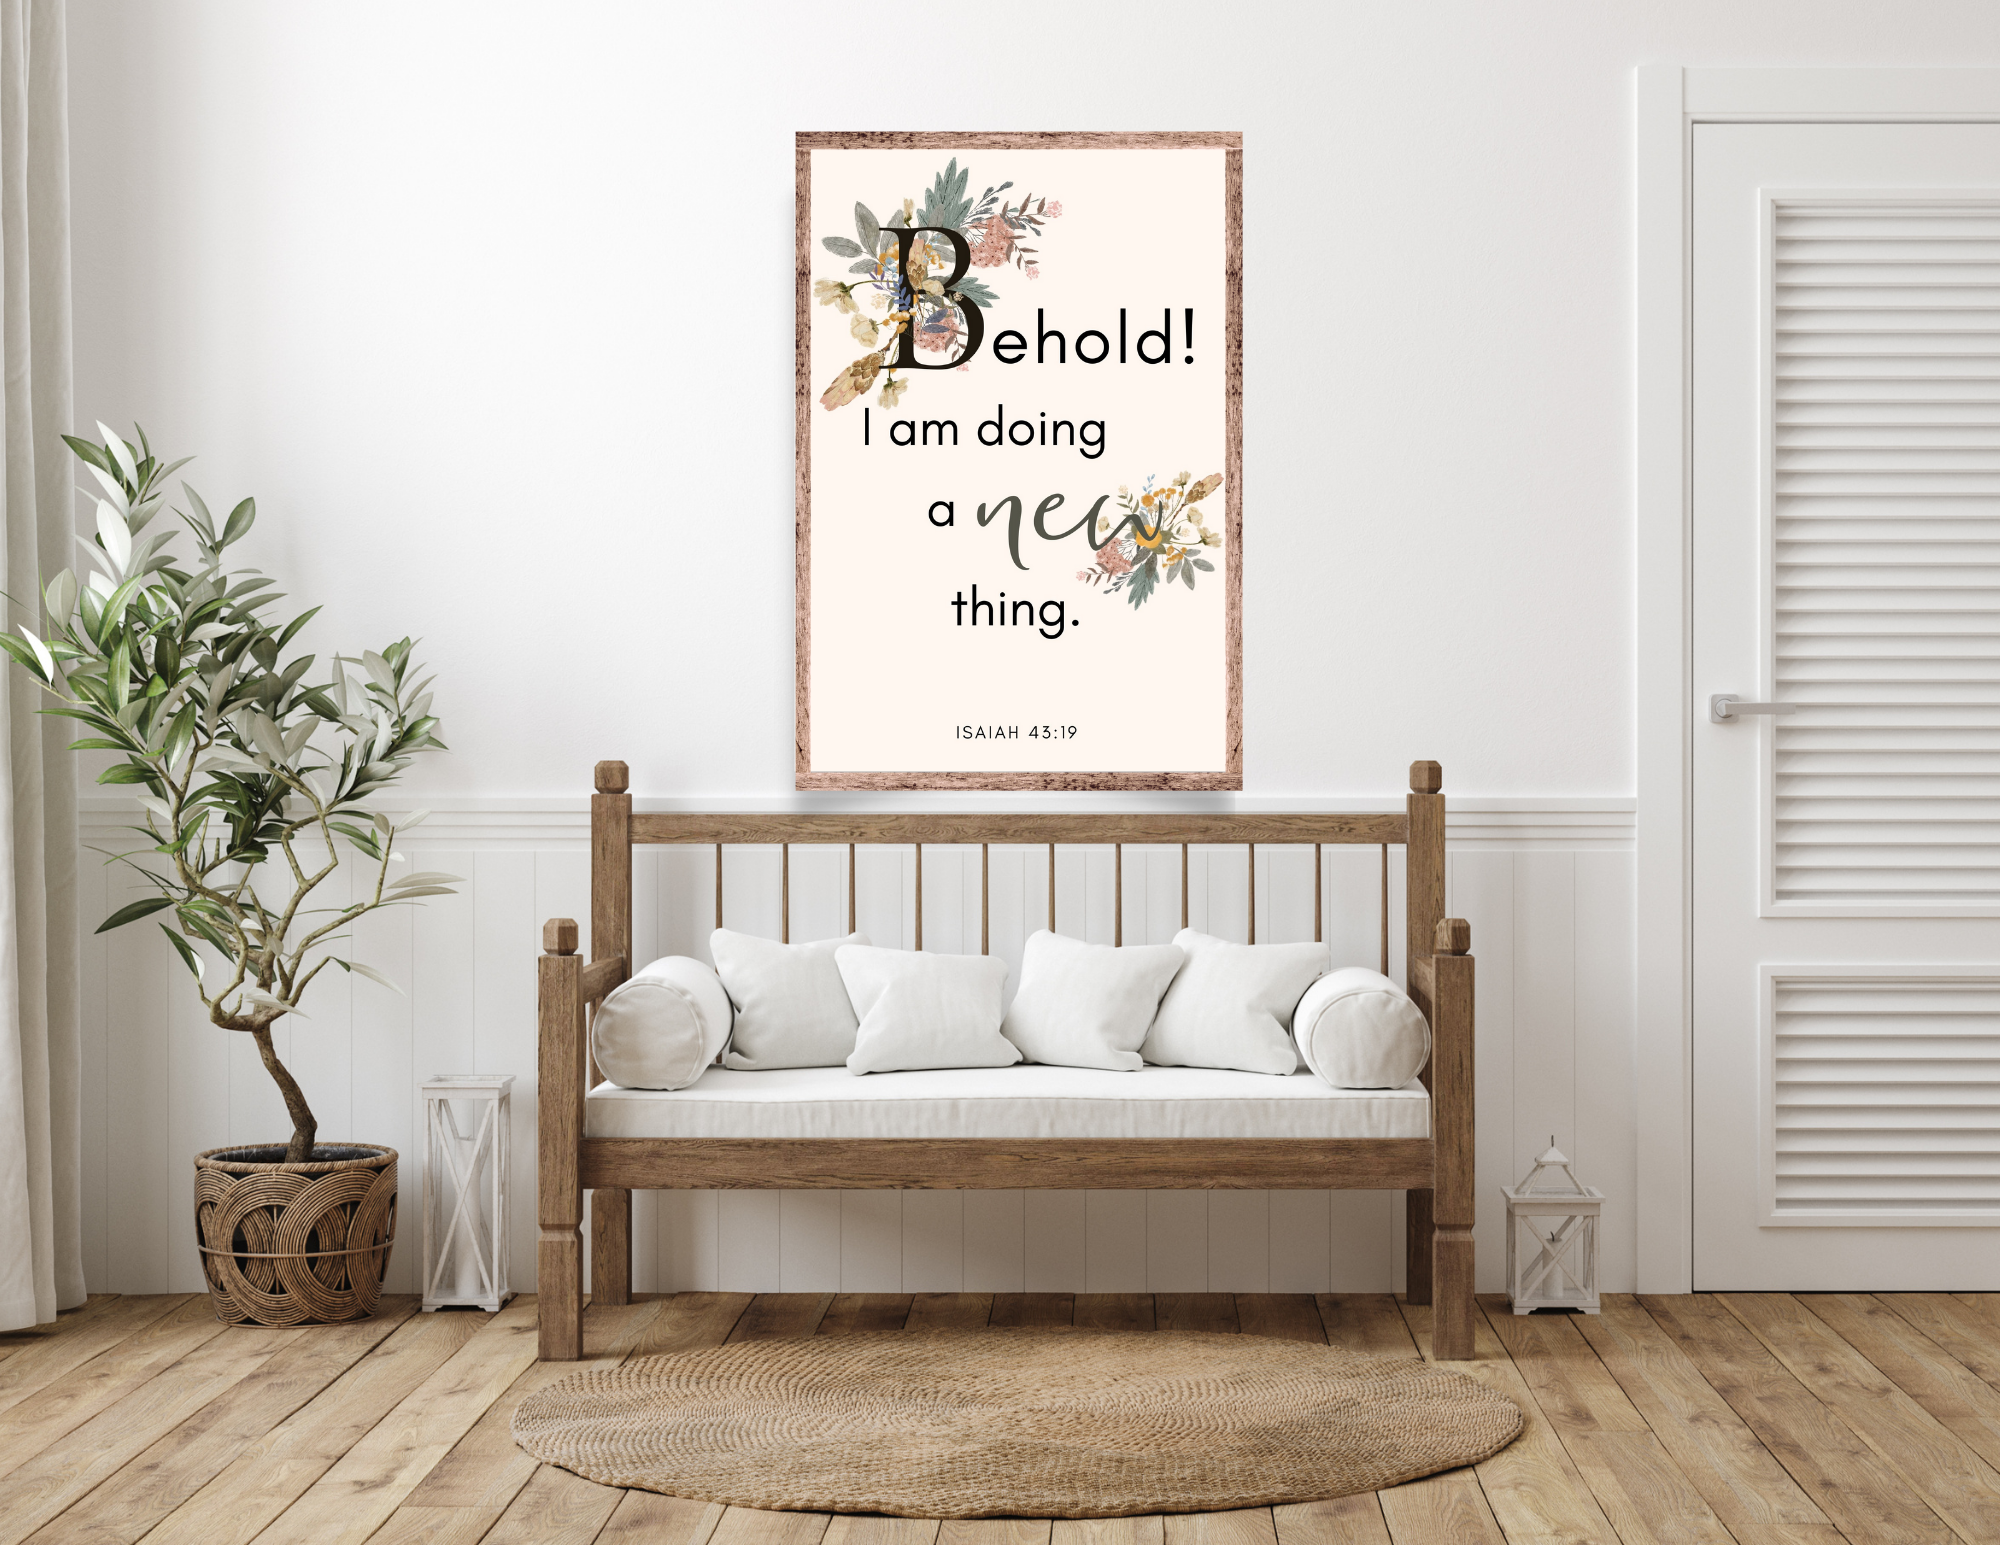 Spring Printable Wall Art: New in the Shop!